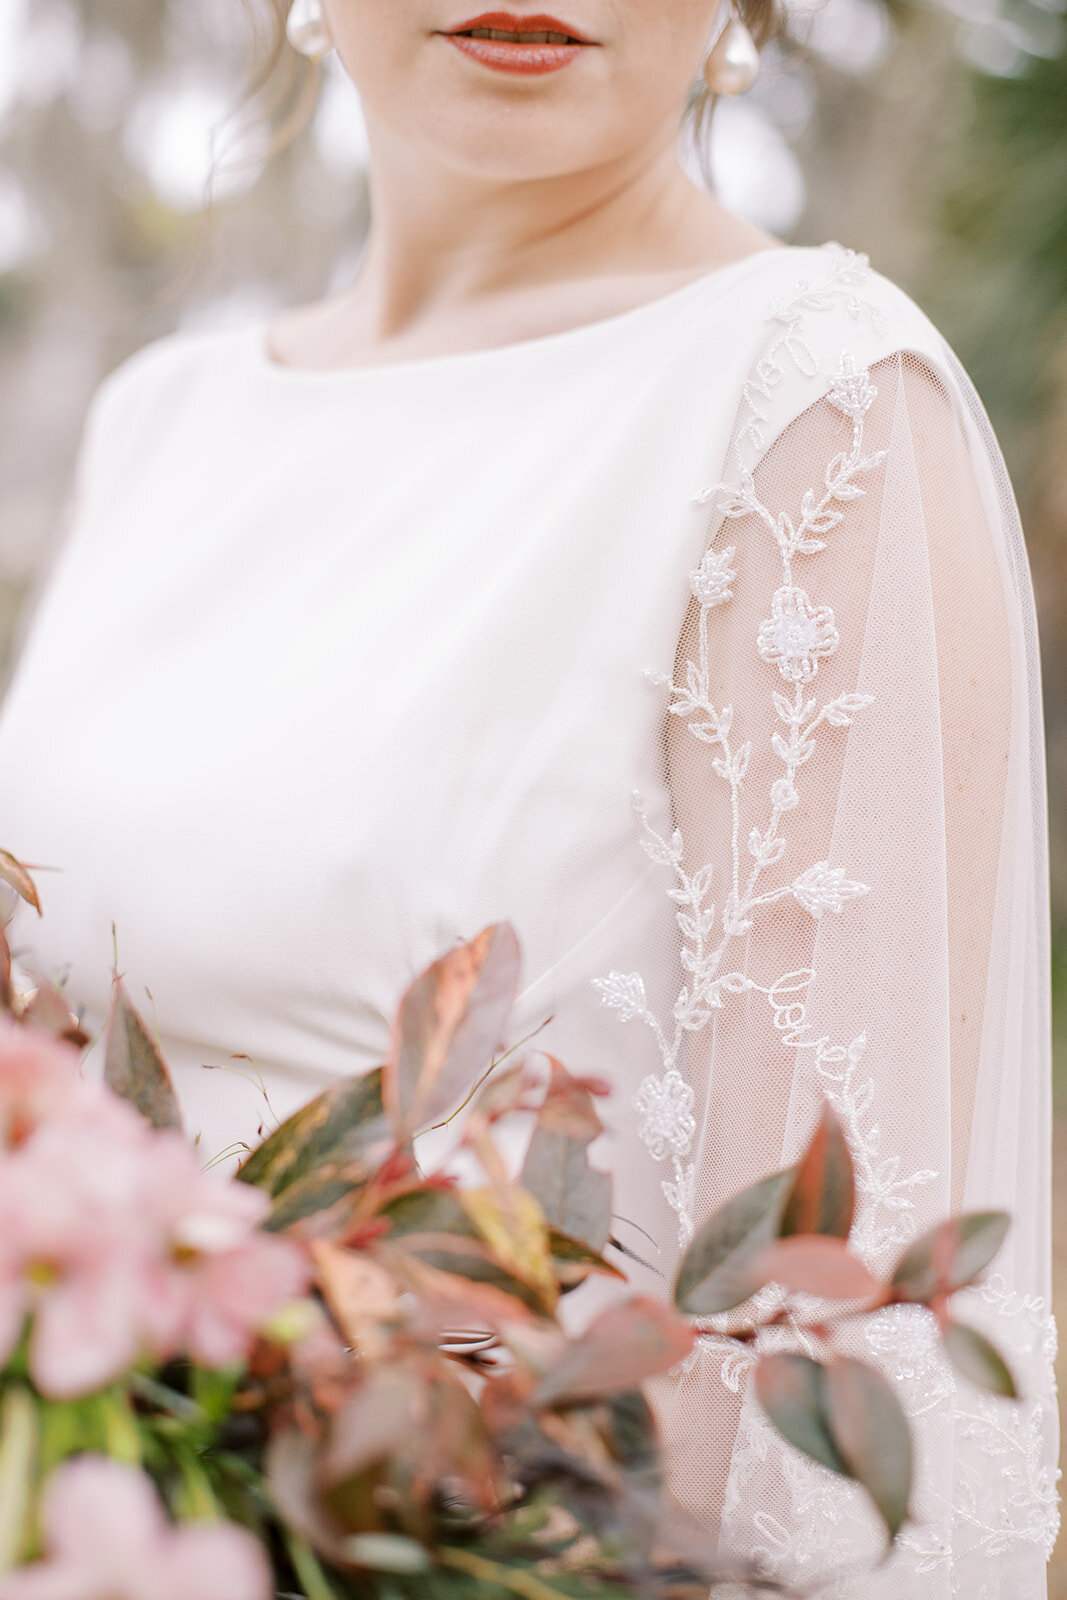 The beaded bridal capelet on the Dolores wedding dress style is custom embroidered with a flower and love motif.